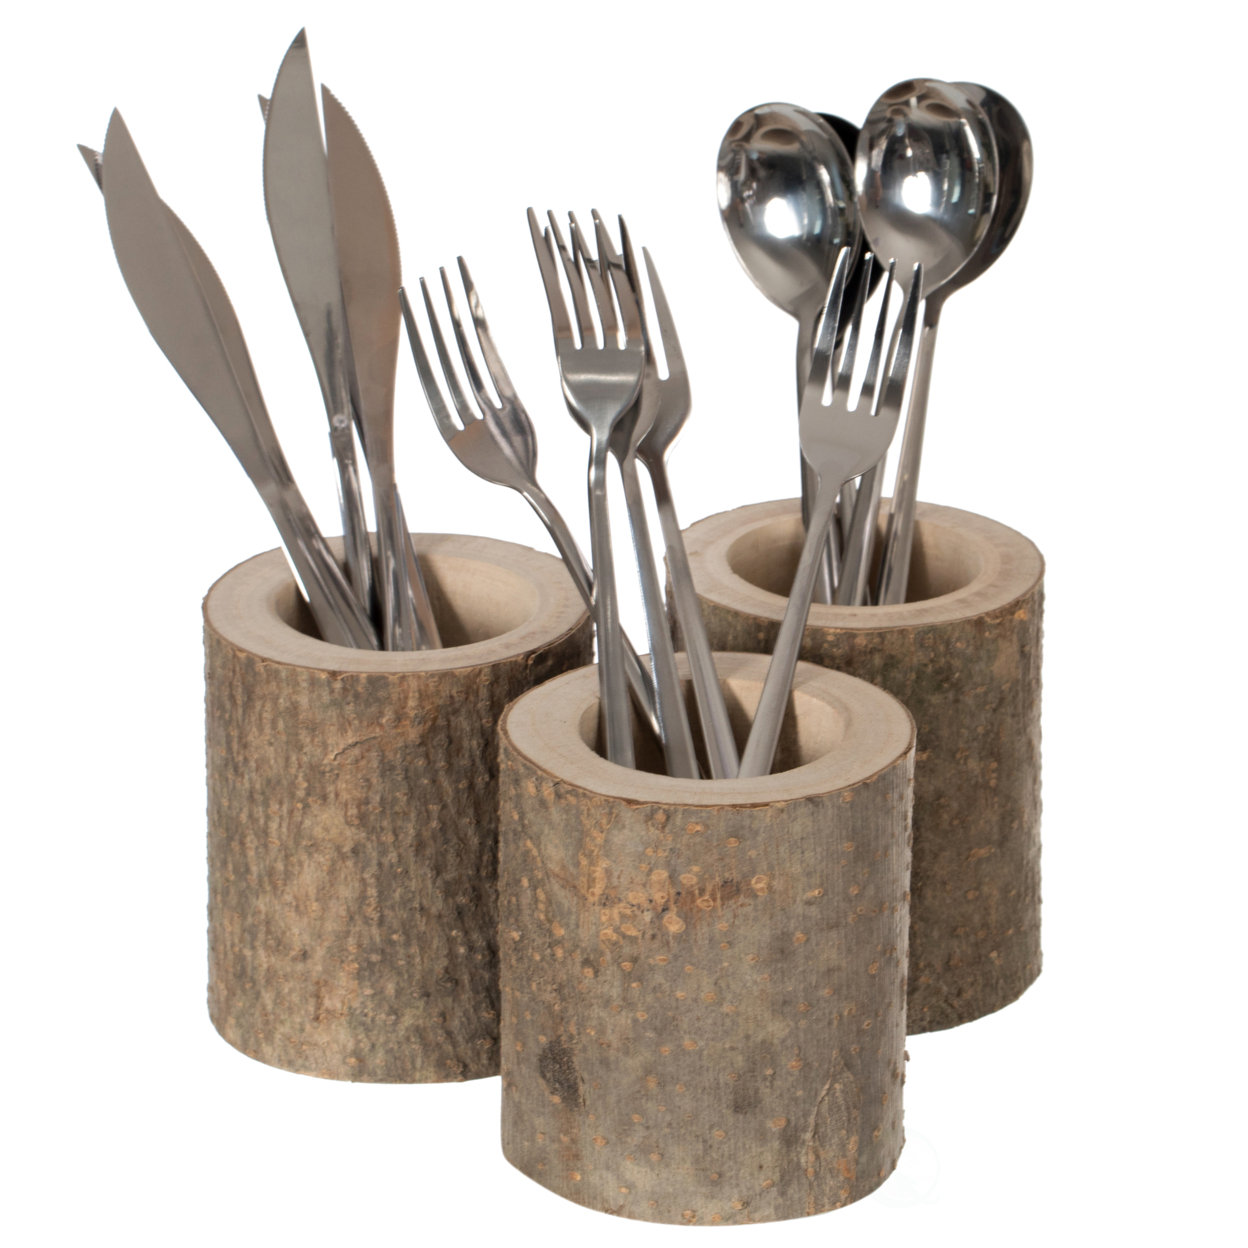 Set Of 3 Rustic Wooden Round Handcrafted Holder Organizer For Flatware Utensil And Supplies